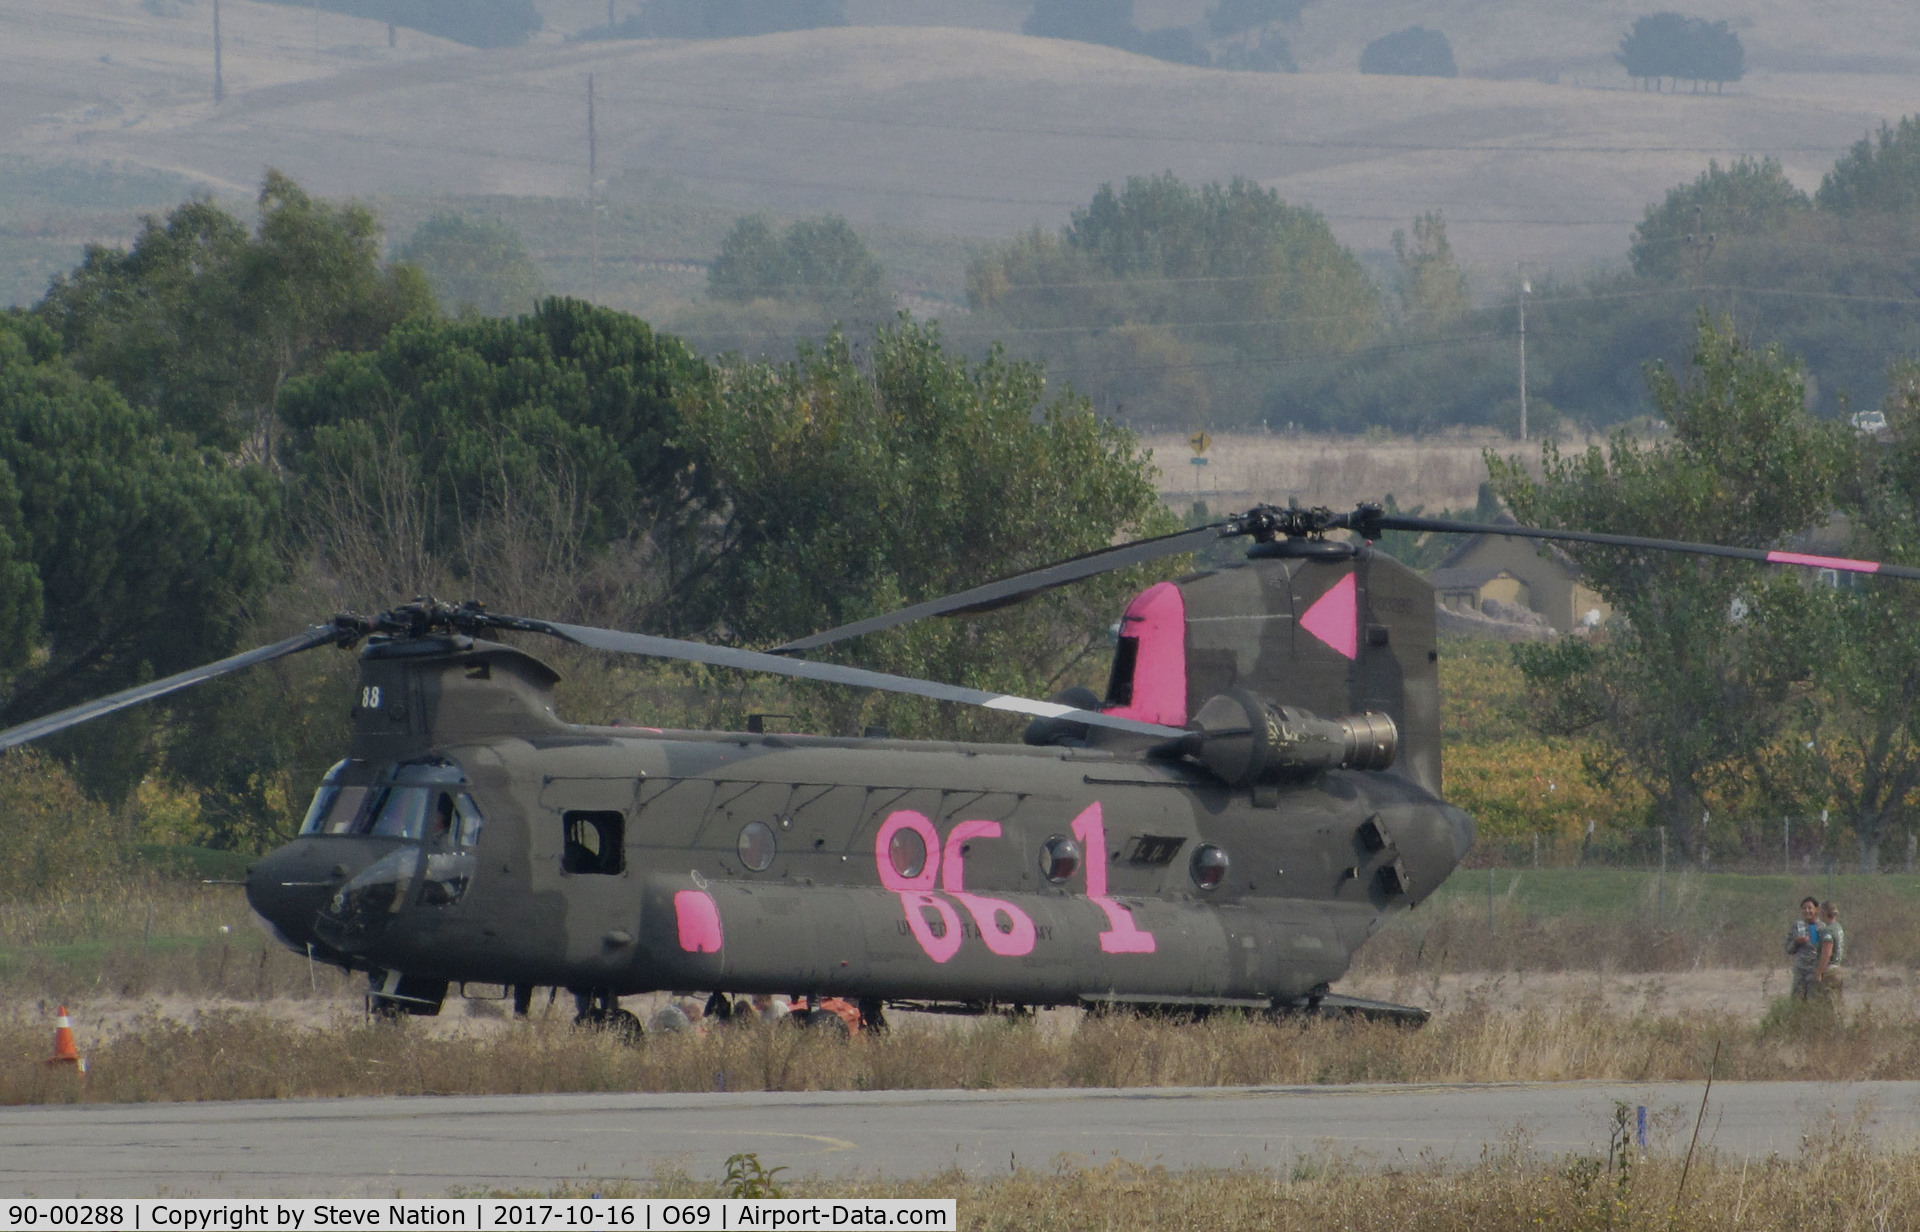 90-00288, 1990 Boeing Vertol CH-47D Chinook C/N M.3429, Nevada Army National Guard CH-47D 90-0288 with 1-189th Aviation Regiment wearing pink #861 @ Petaluma Municipal Airport, CA temporary home base in support of efforts to control devastating Northern California Oct 2017 wildfires